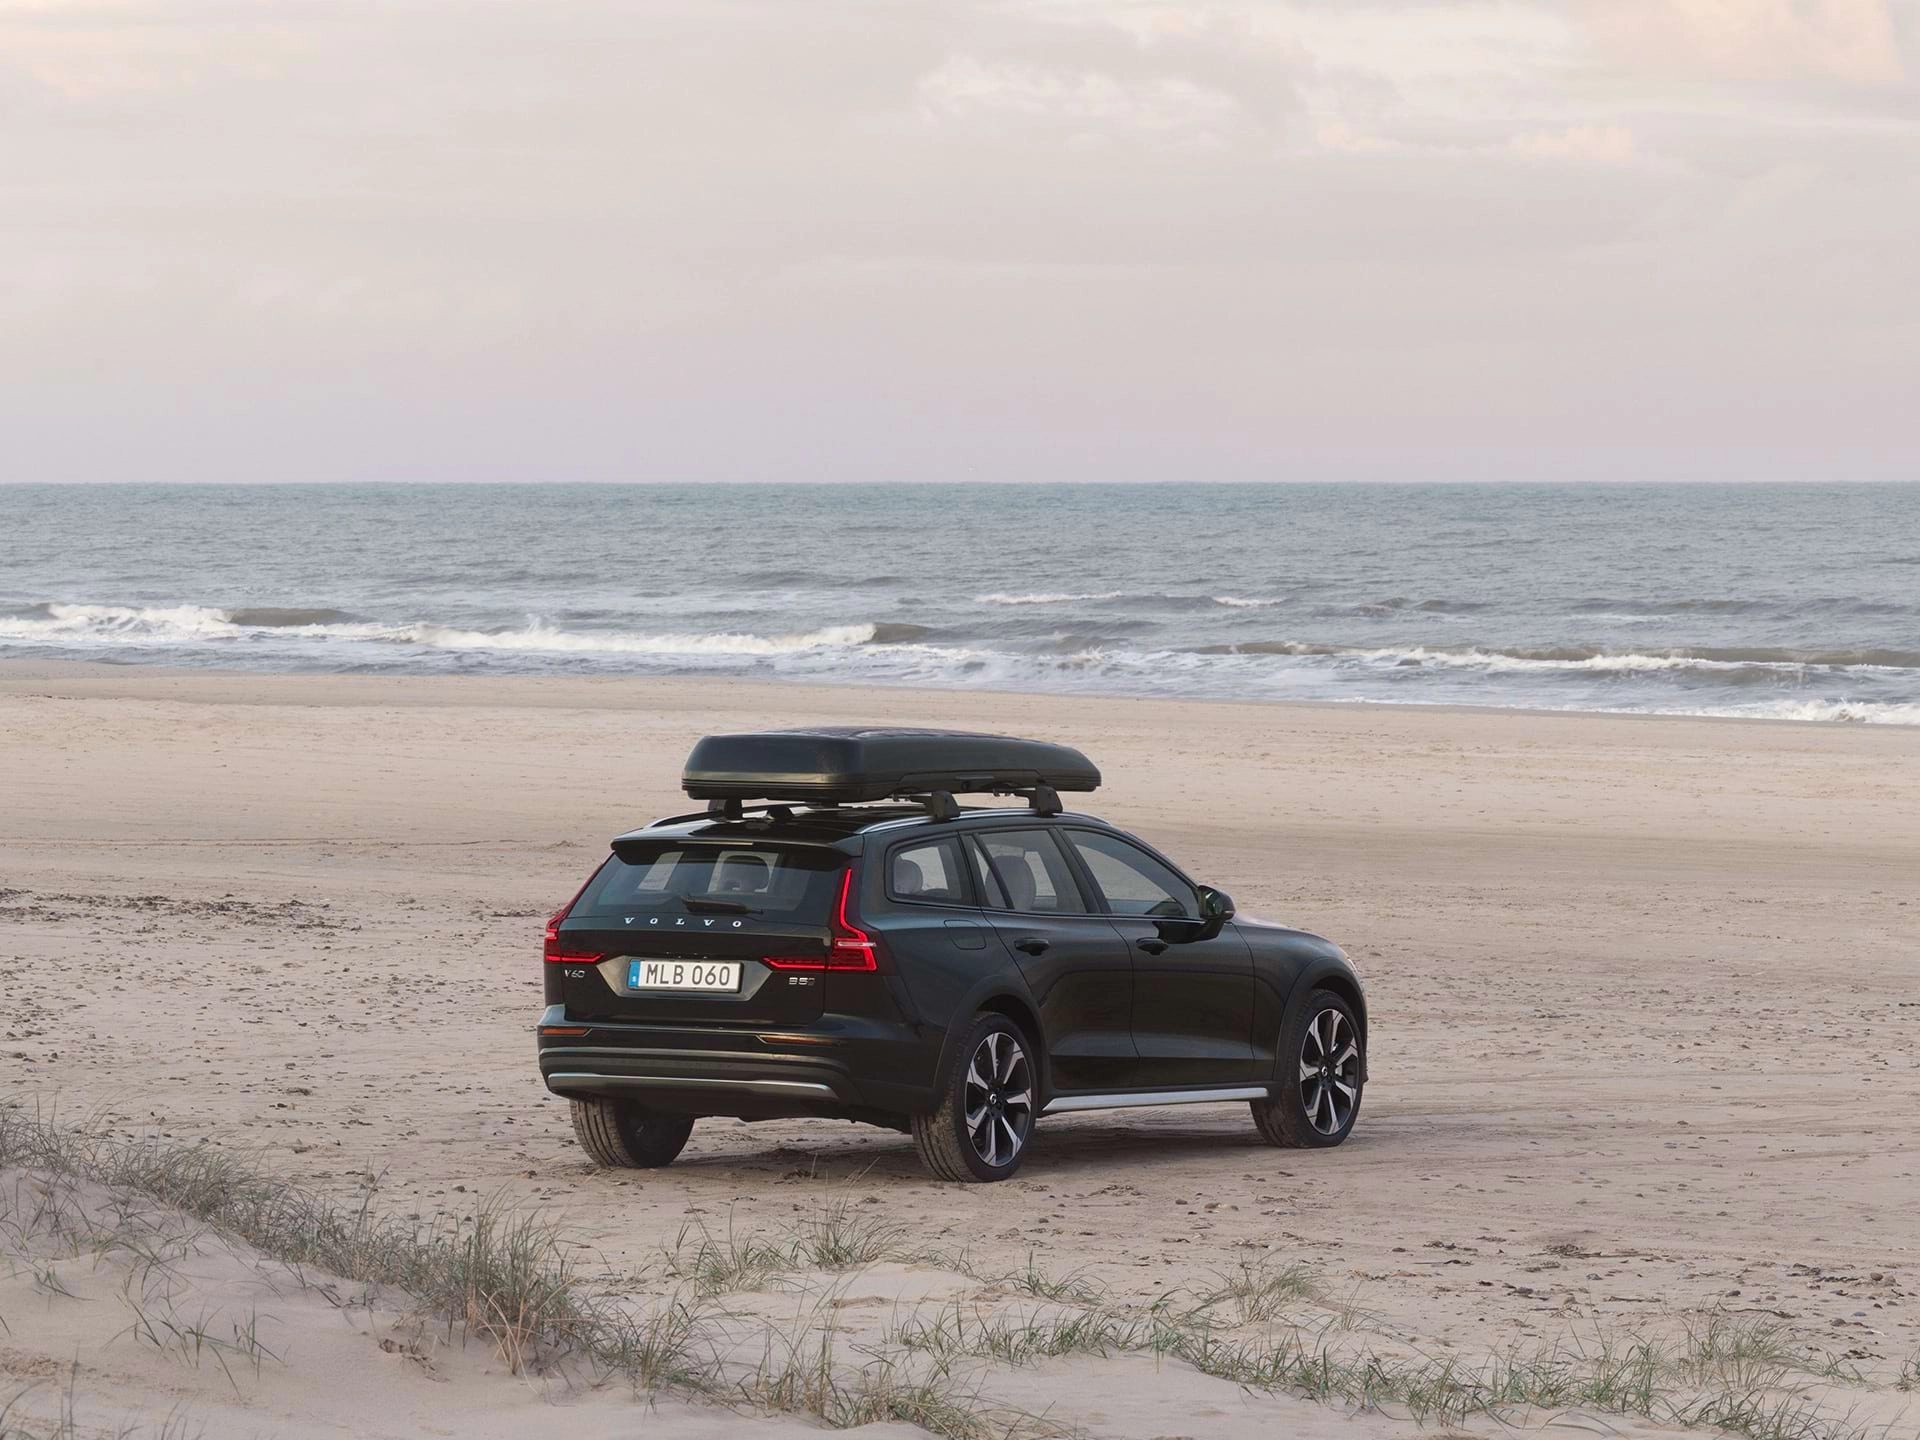 A Volvo estate car with a roof box sits parked on a sandy beach.